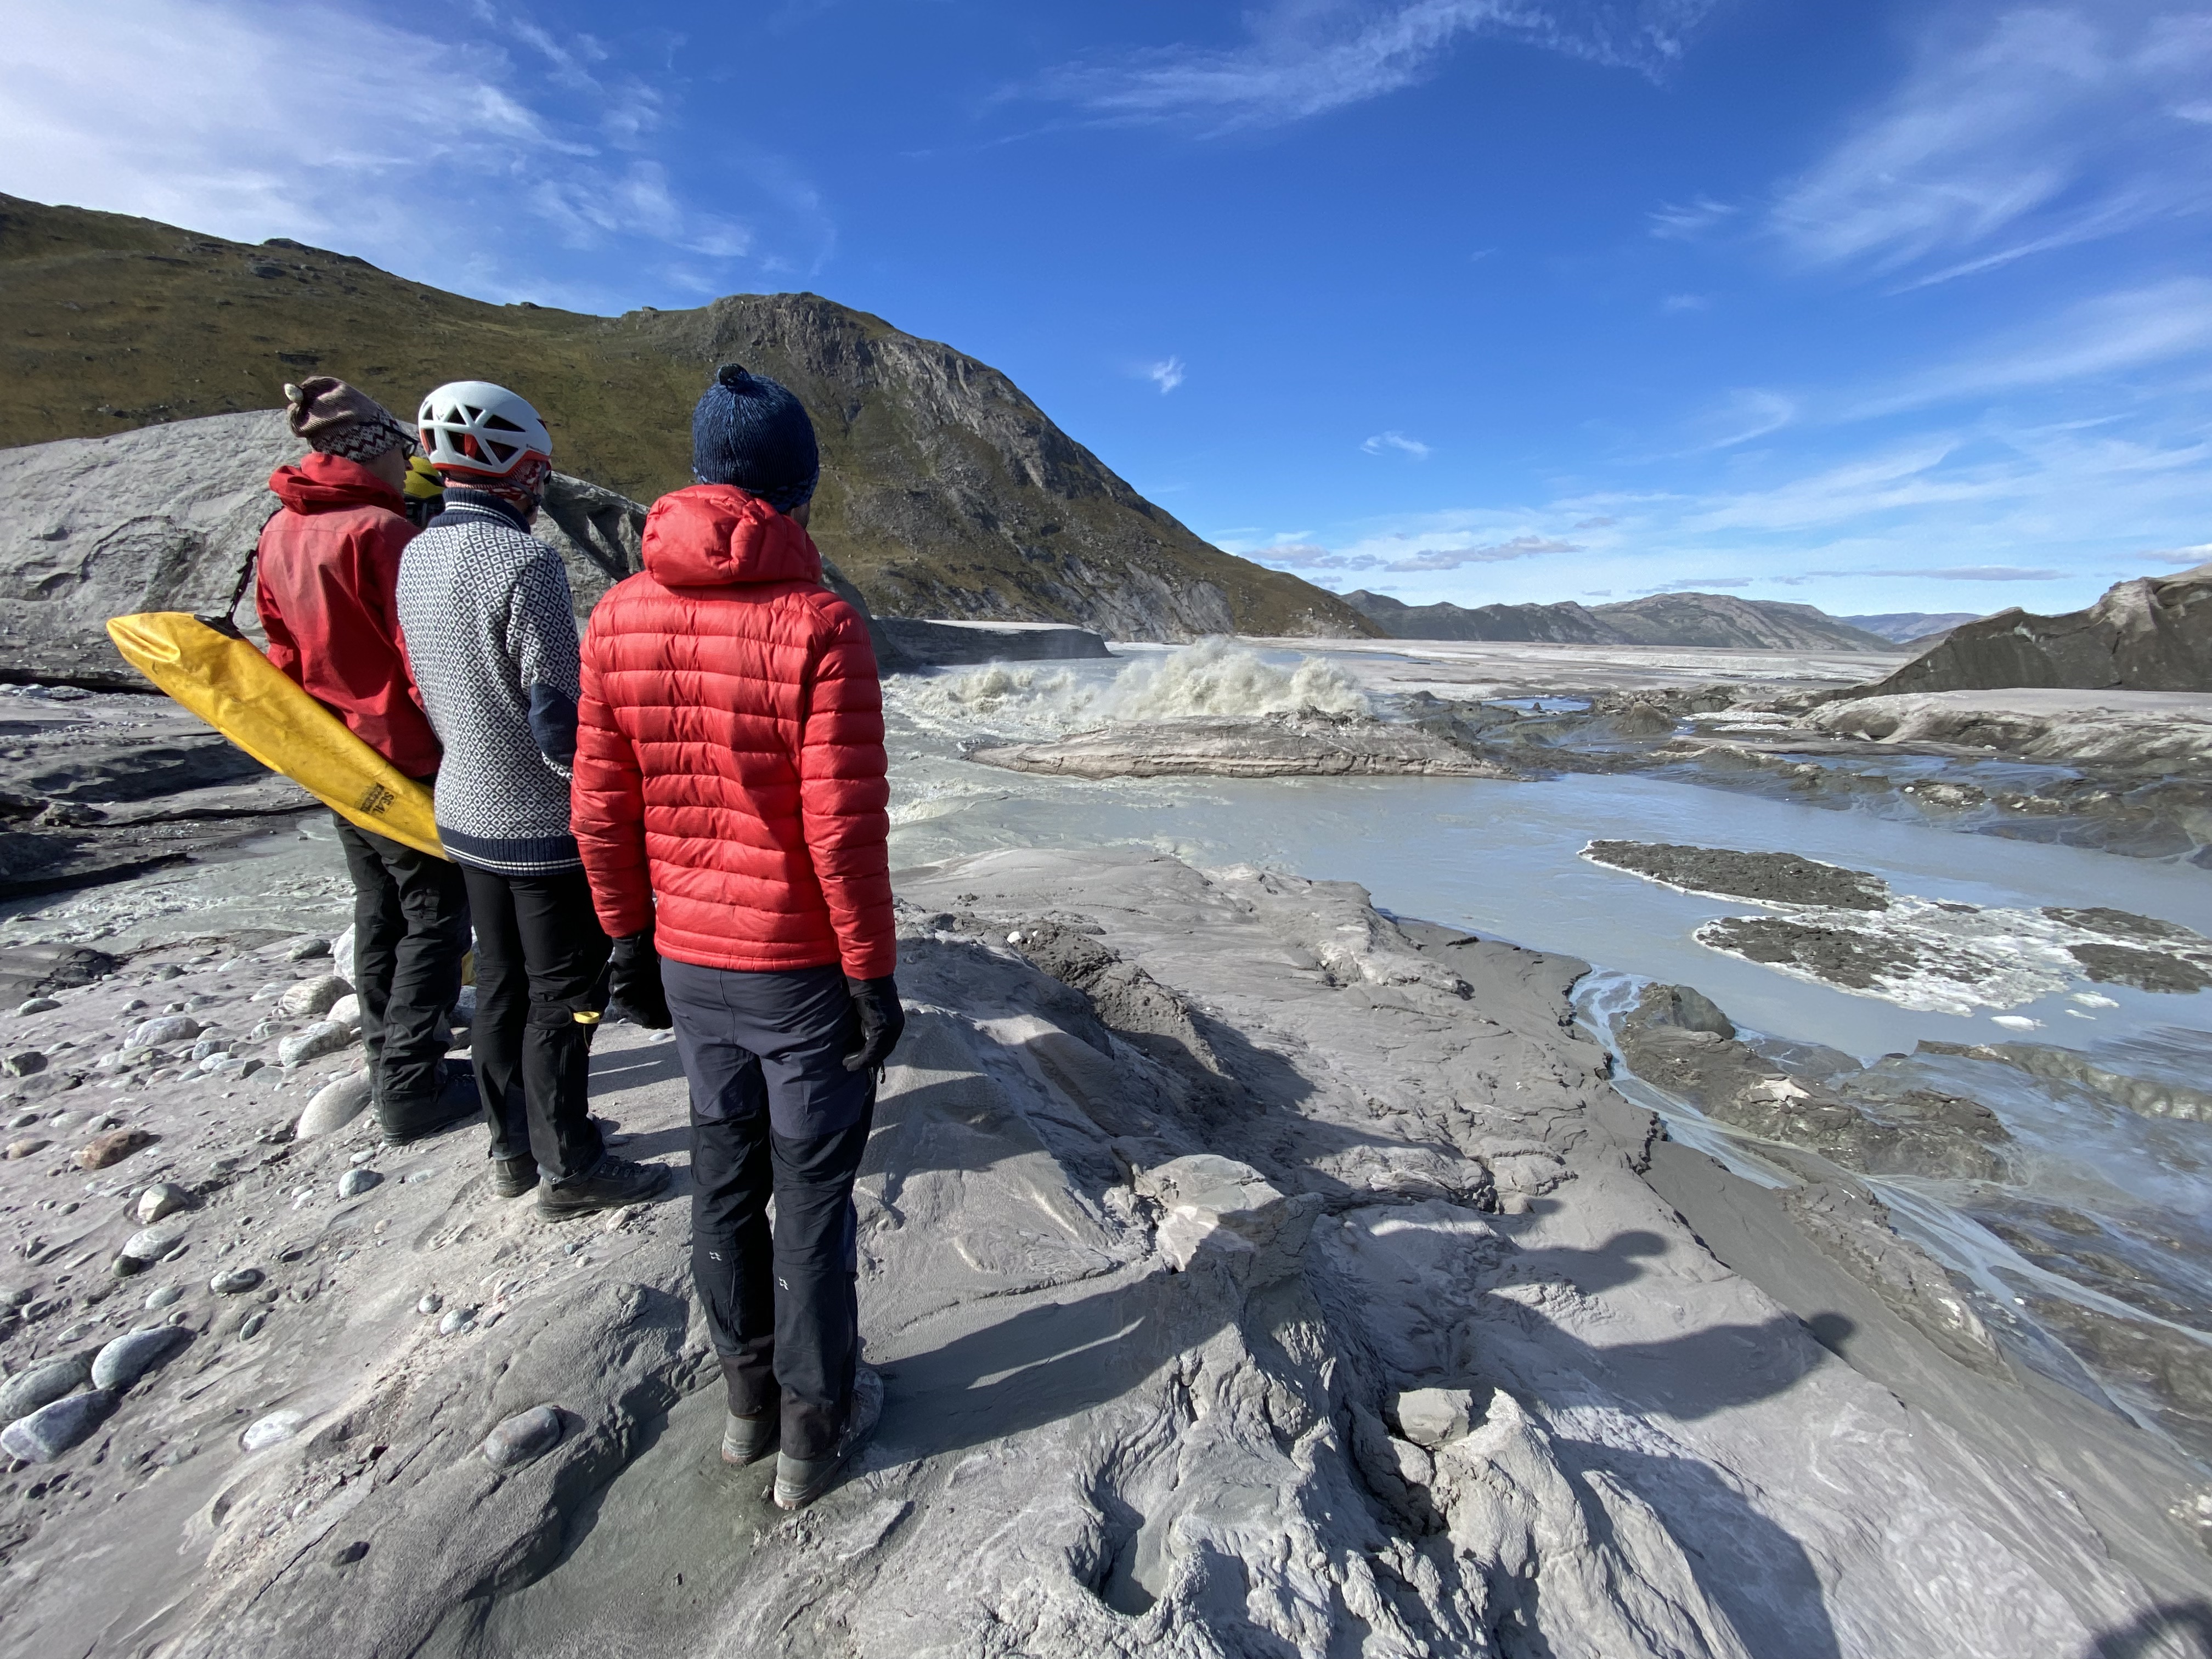 Three scientists observe glacier meltwater beneath mountains and clear skies